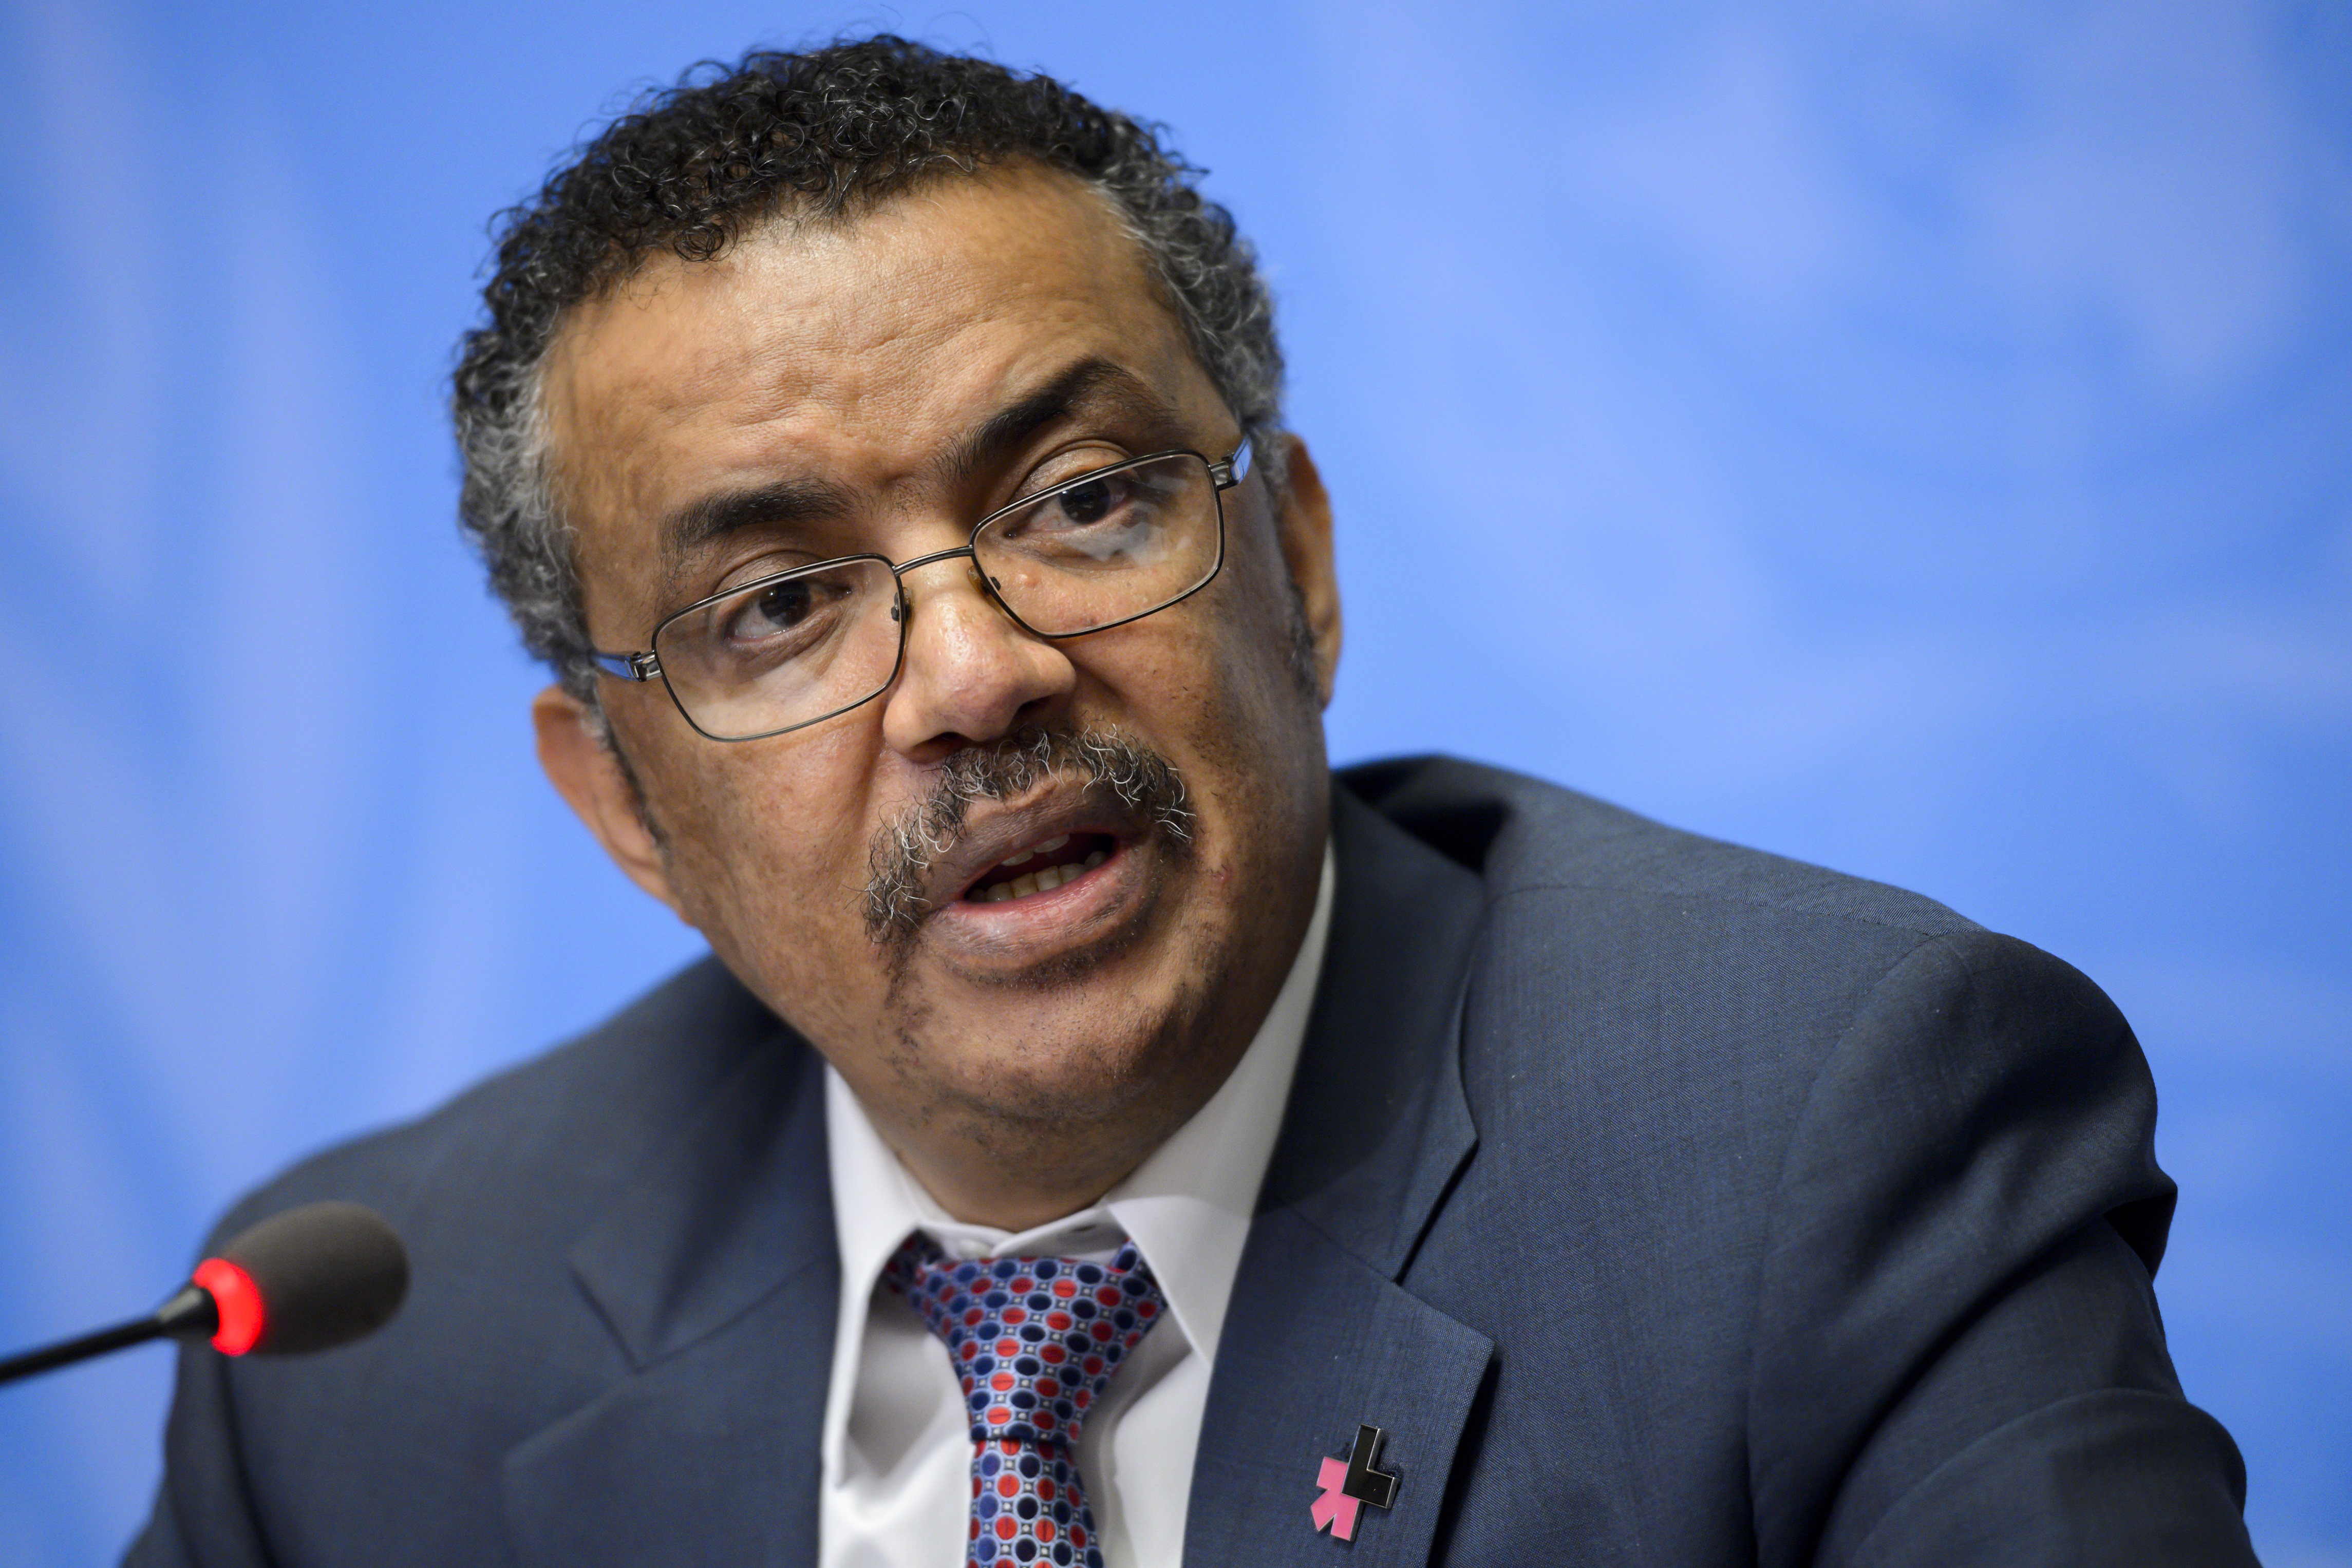 Ethiopian Minister of Foreign Affairs Tedros Adhanom Ghebreyesus attends a press conference launching his candidacy to the post of Director General of the World Health Organization (WHO). Tedros won the election on Tuesday, May 23. (FABRICE COFFRINI&mdash;AFP/Getty Images)